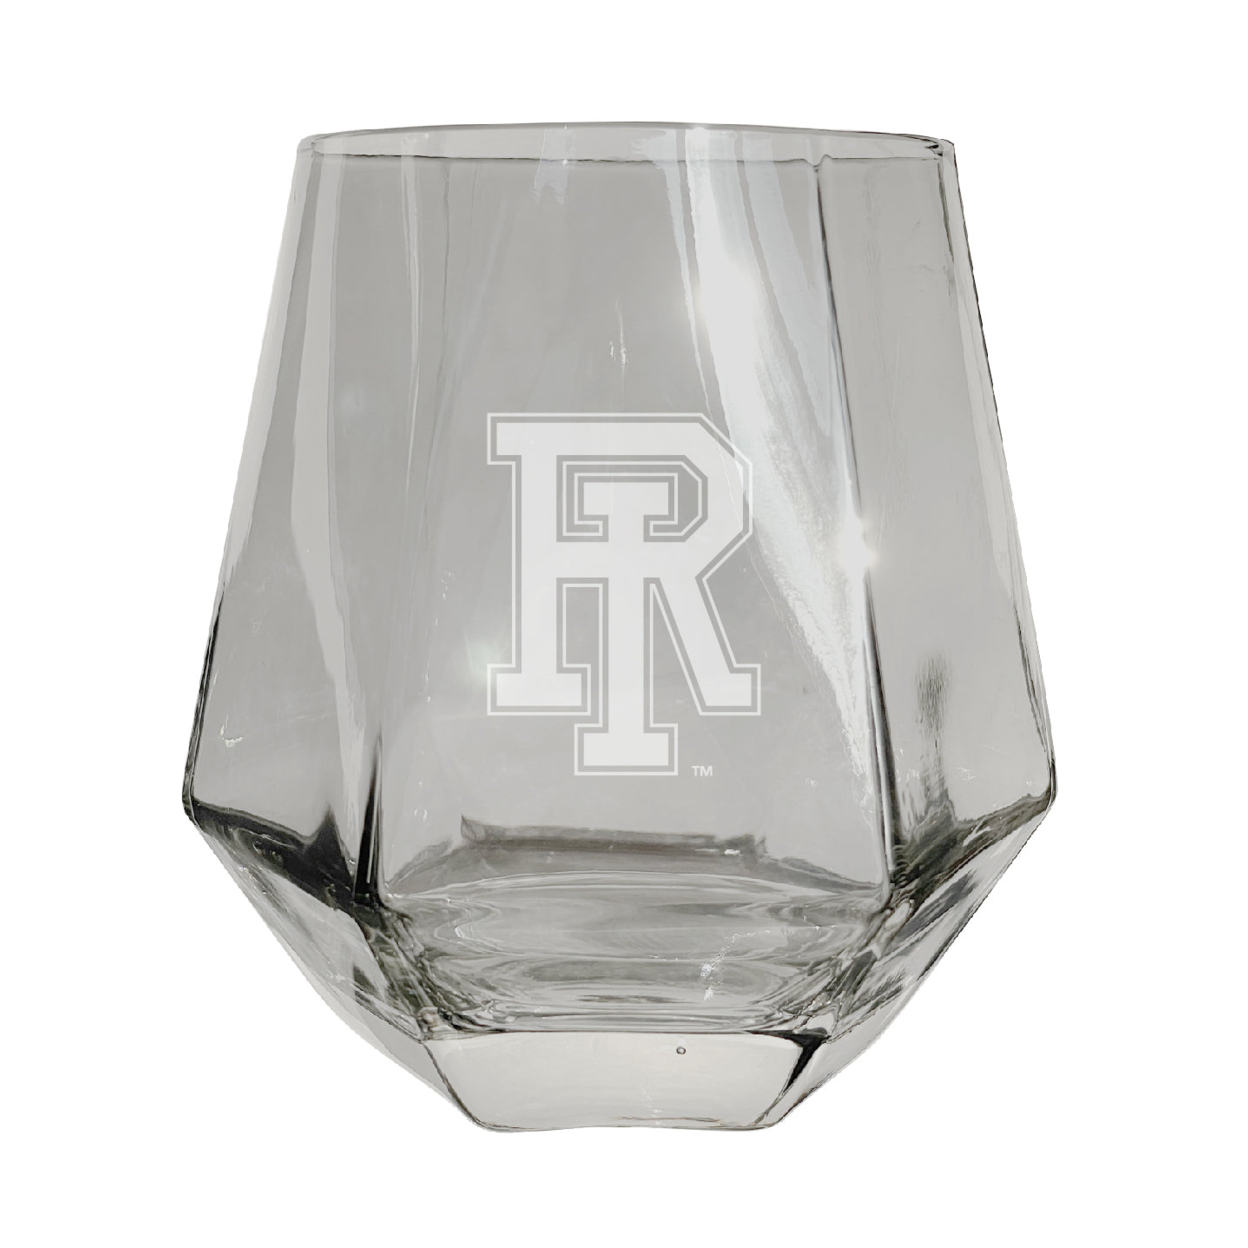 Rhode Island University Etched Diamond Cut Stemless 10 Ounce Wine Glass Clear